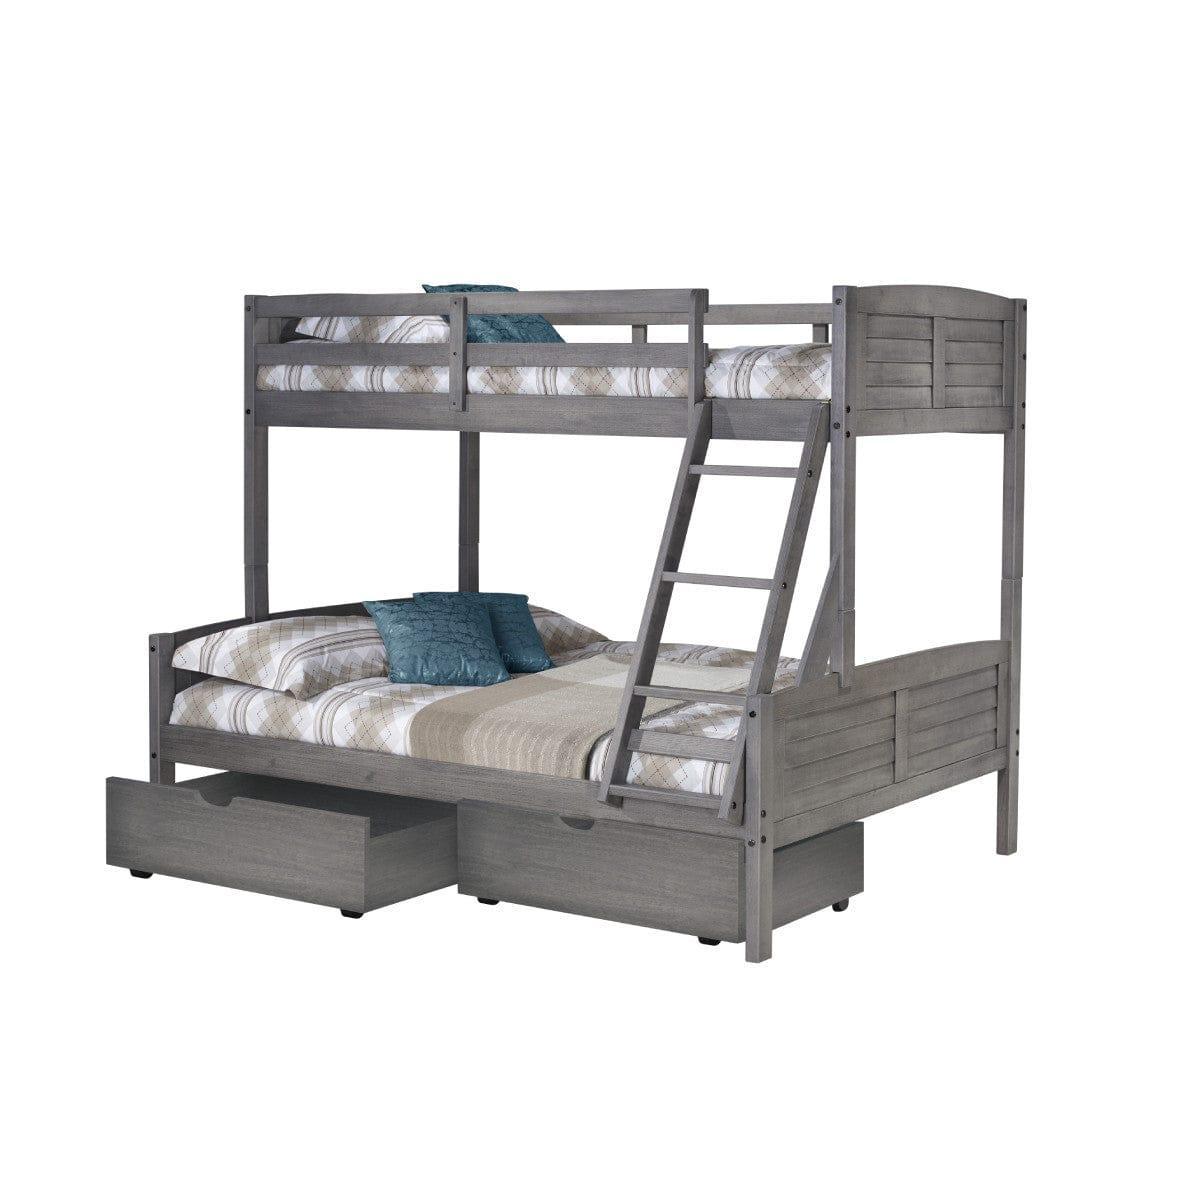 Donco  Twin/Full Louver Bunk Bed With Dual Under Bed Drawers In Antique Grey Finish 2012-TFAG_505-AG - Bedroom Depot USA